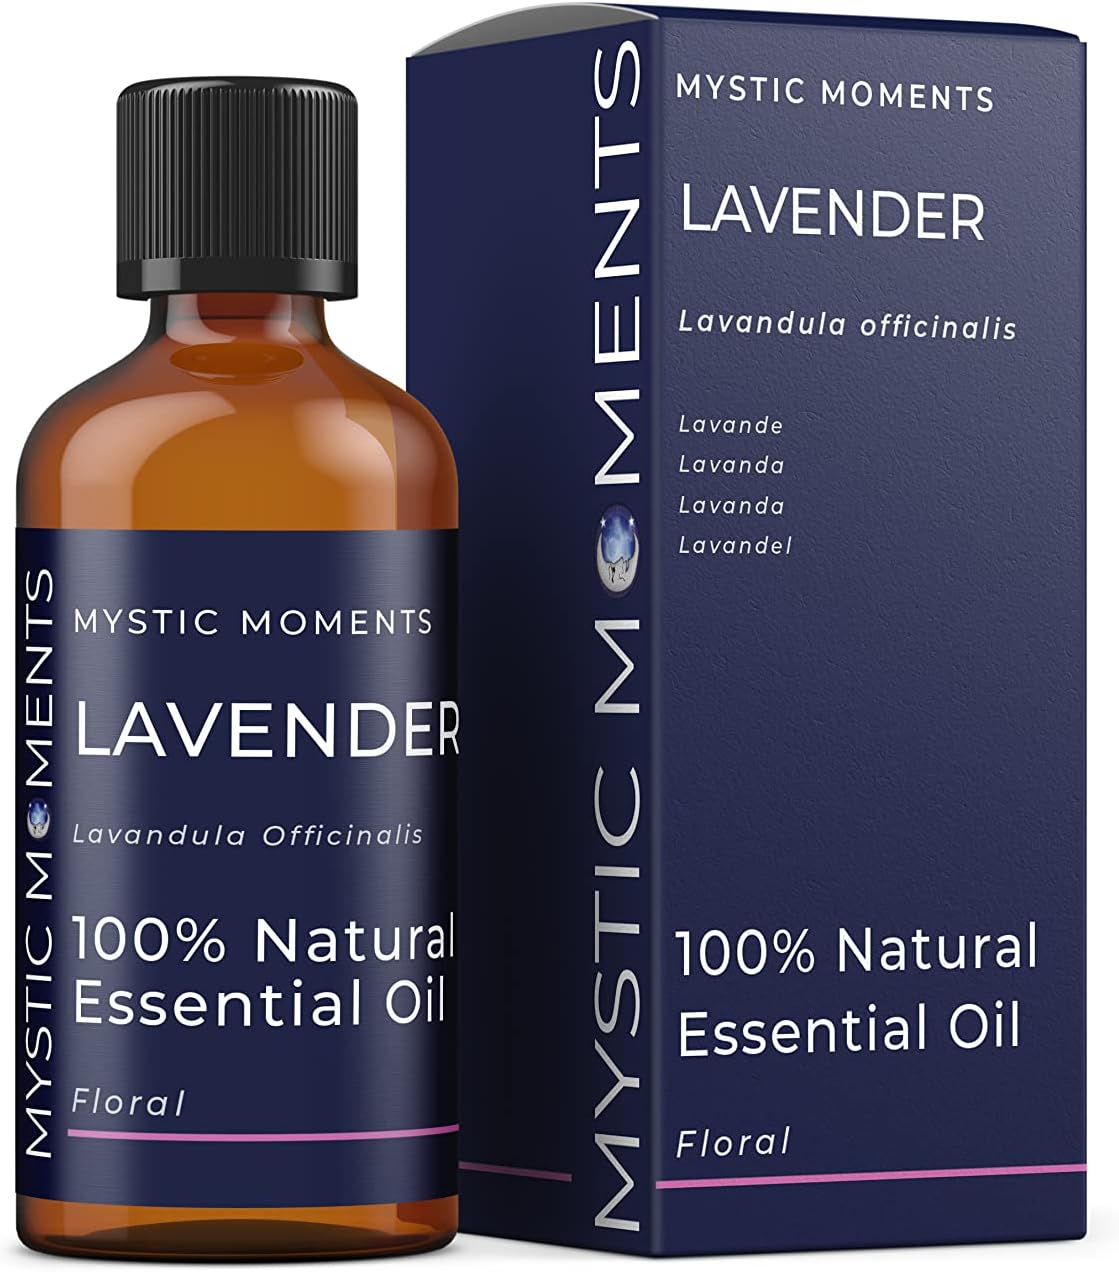 Mystic Moments | Lavender Essential Oil 100ml - Natural oil for Diffusers, Aromatherapy & Massage Blends Vegan GMO Free